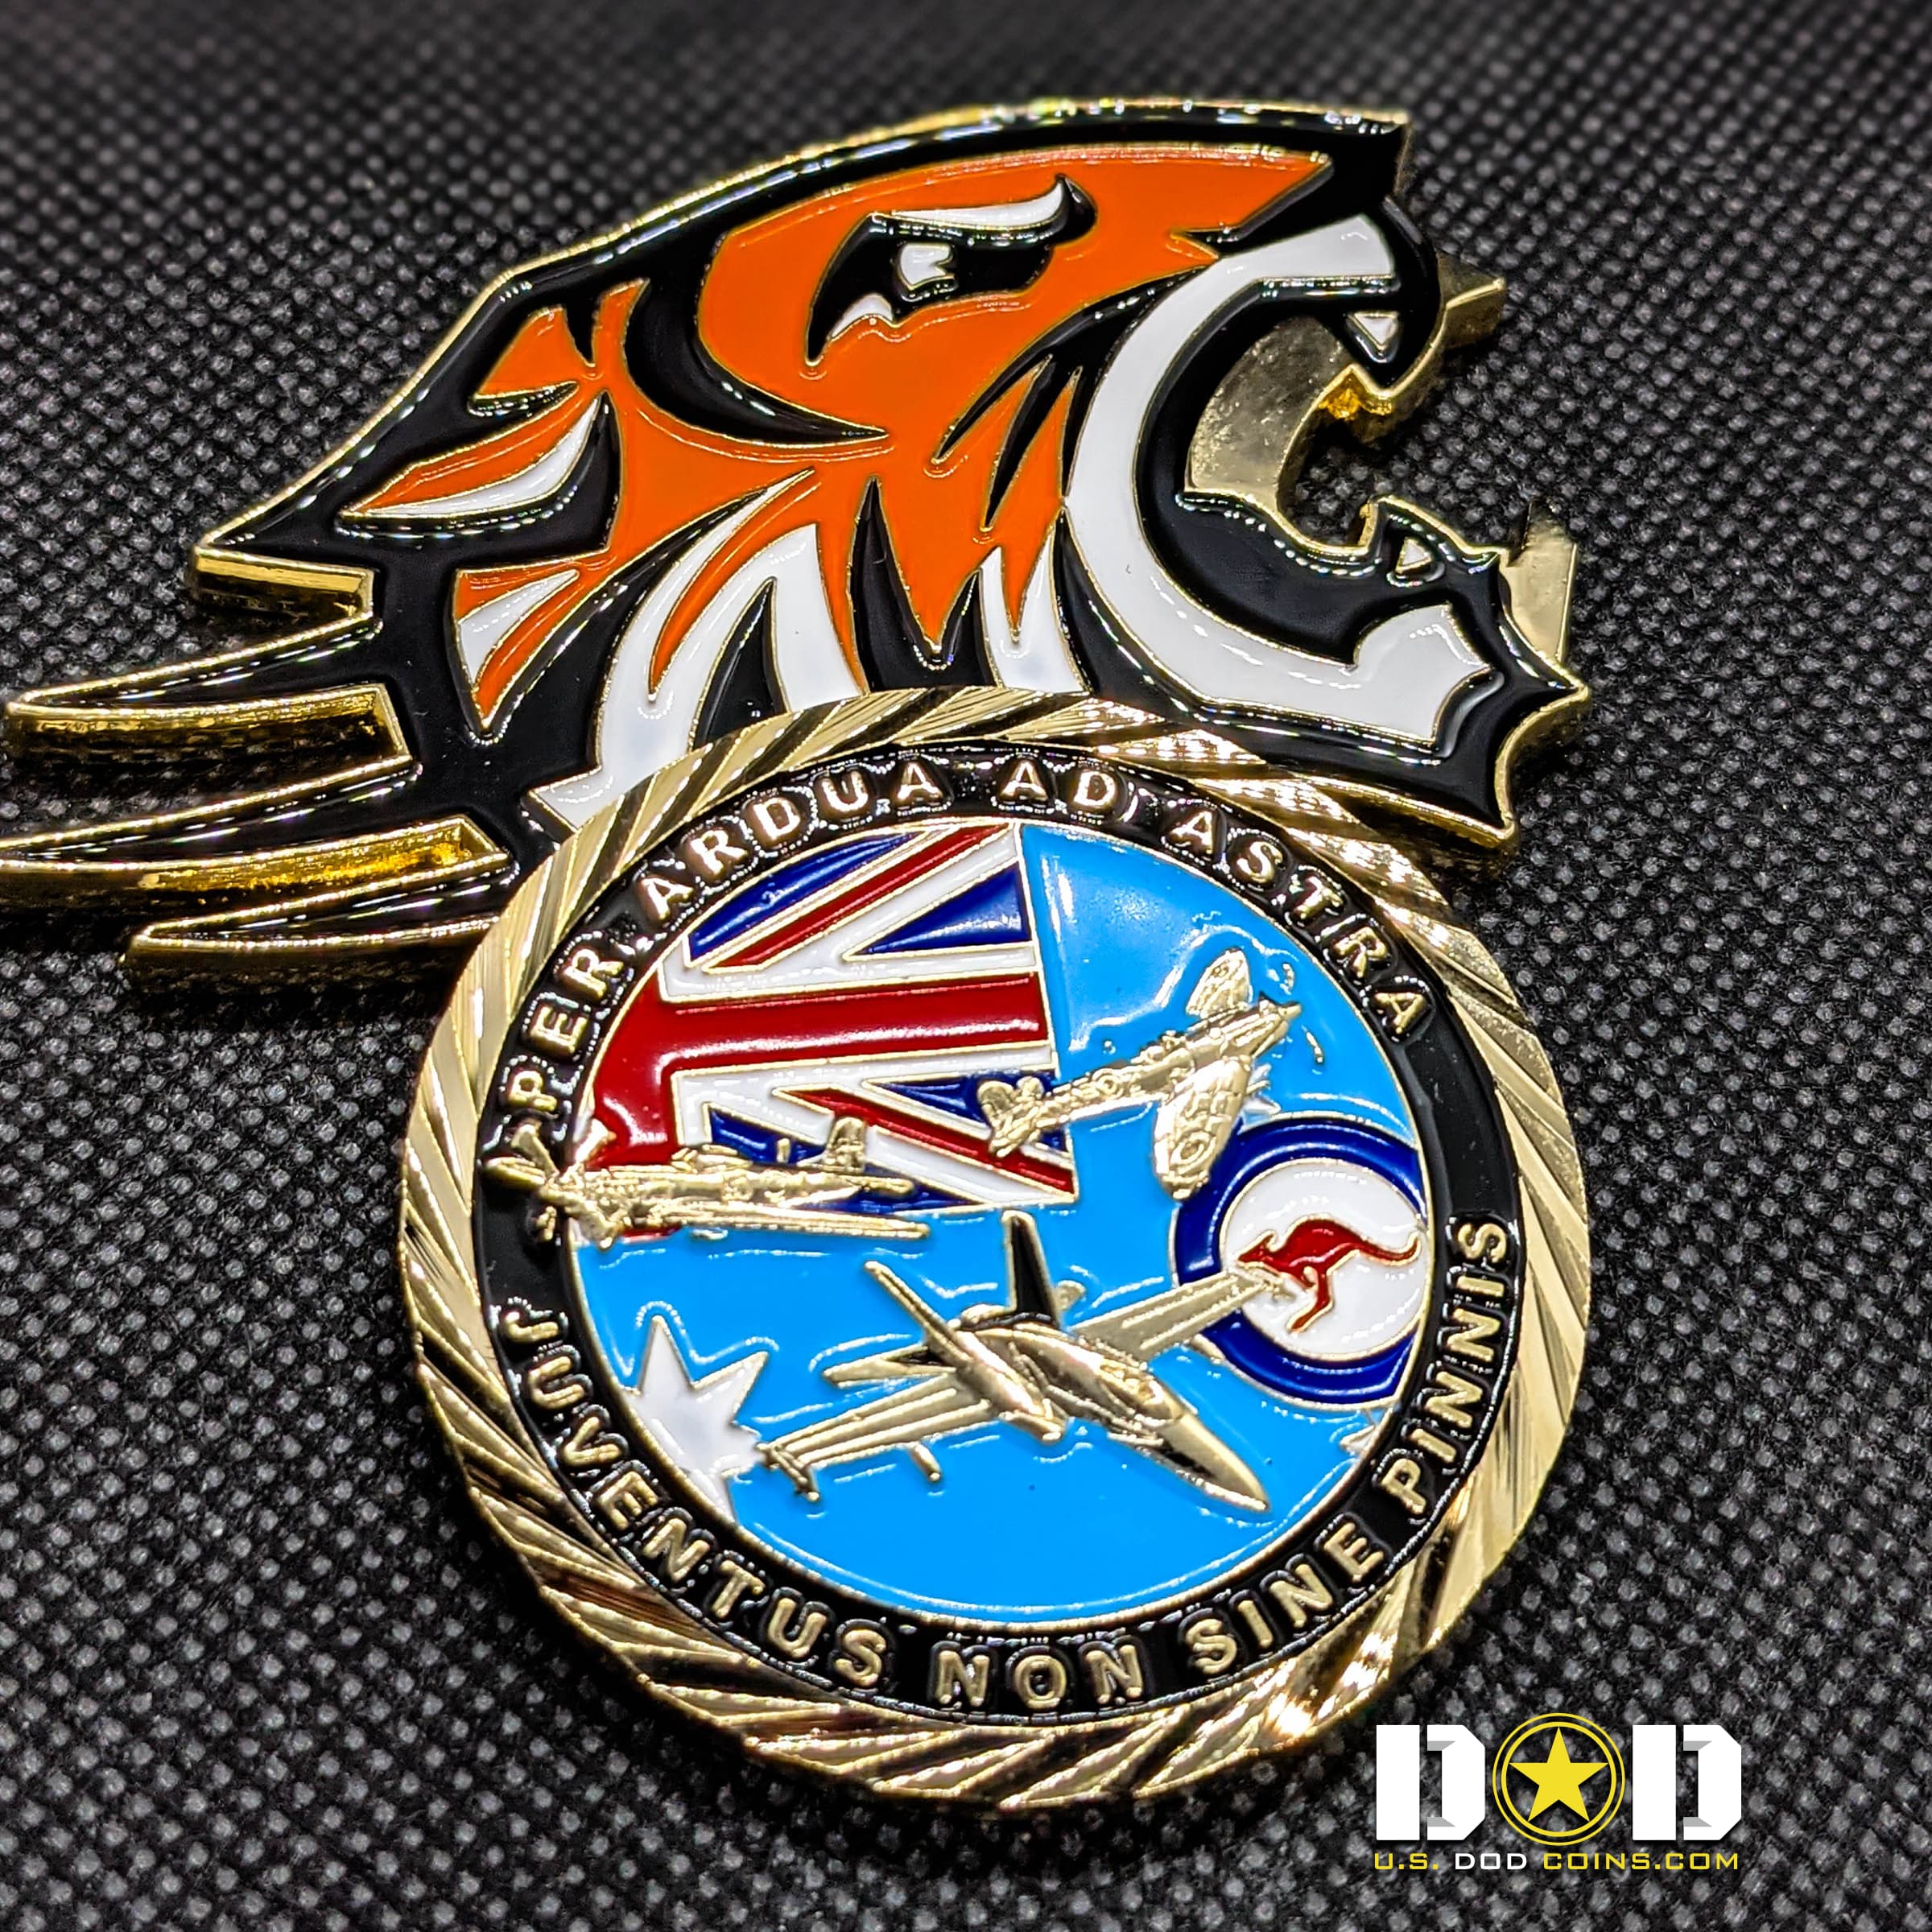 2OCU-Royal-Australian-Air-Force---Tigers-Challenge-Coins_0001_USDODCoins-Challenge-Coins-Examples-69